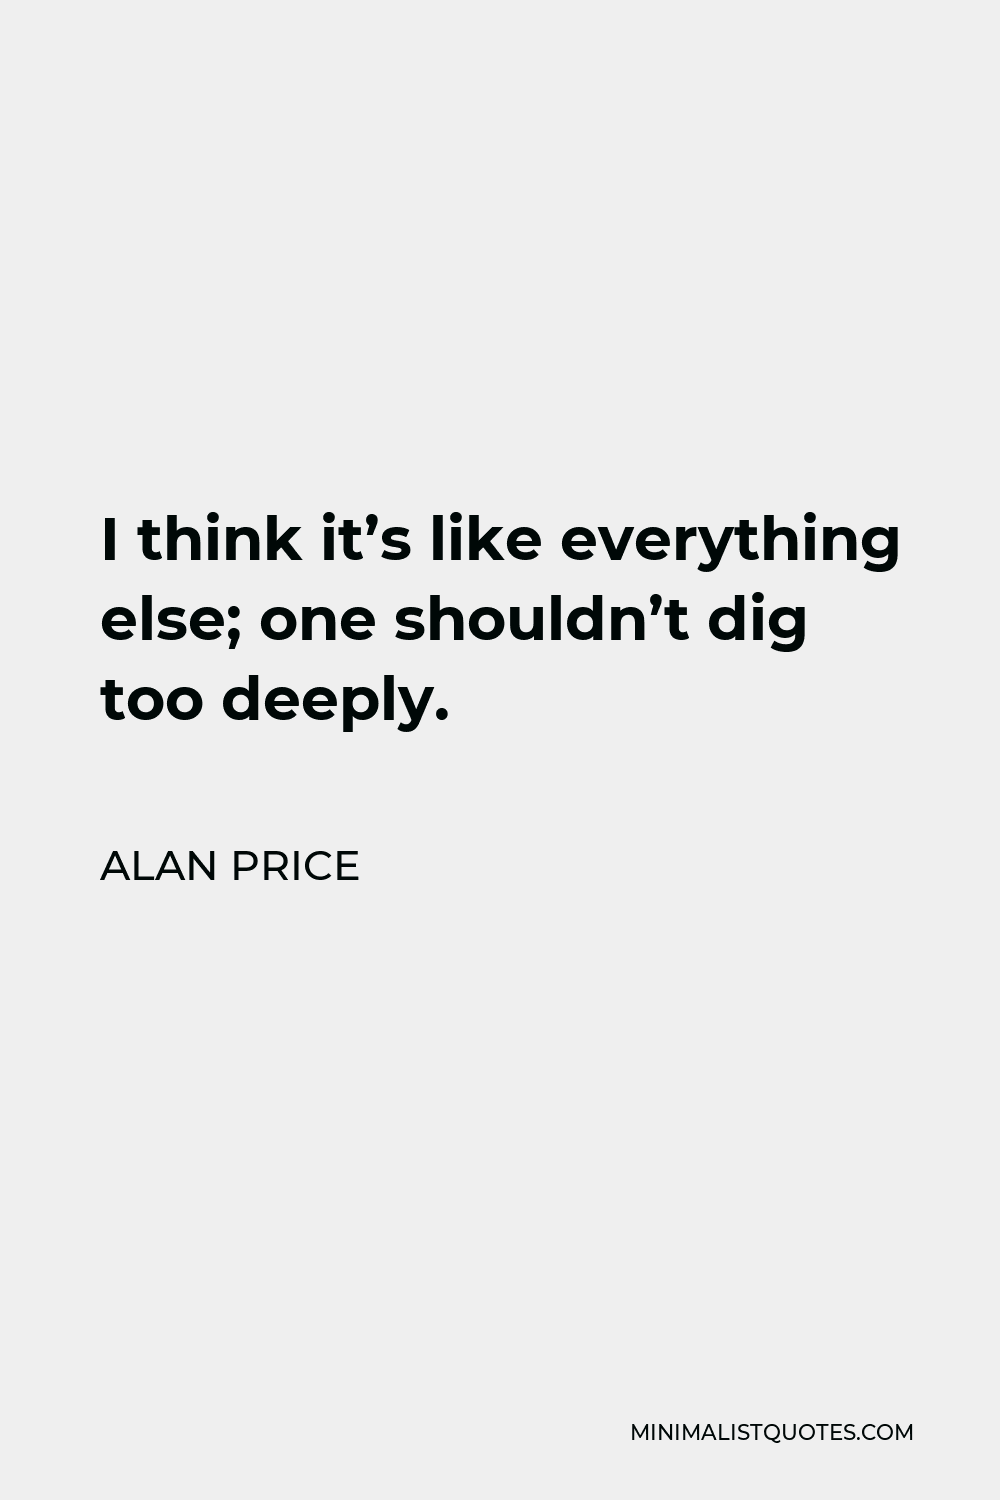 Alan Price Quote - I think it’s like everything else; one shouldn’t dig too deeply.